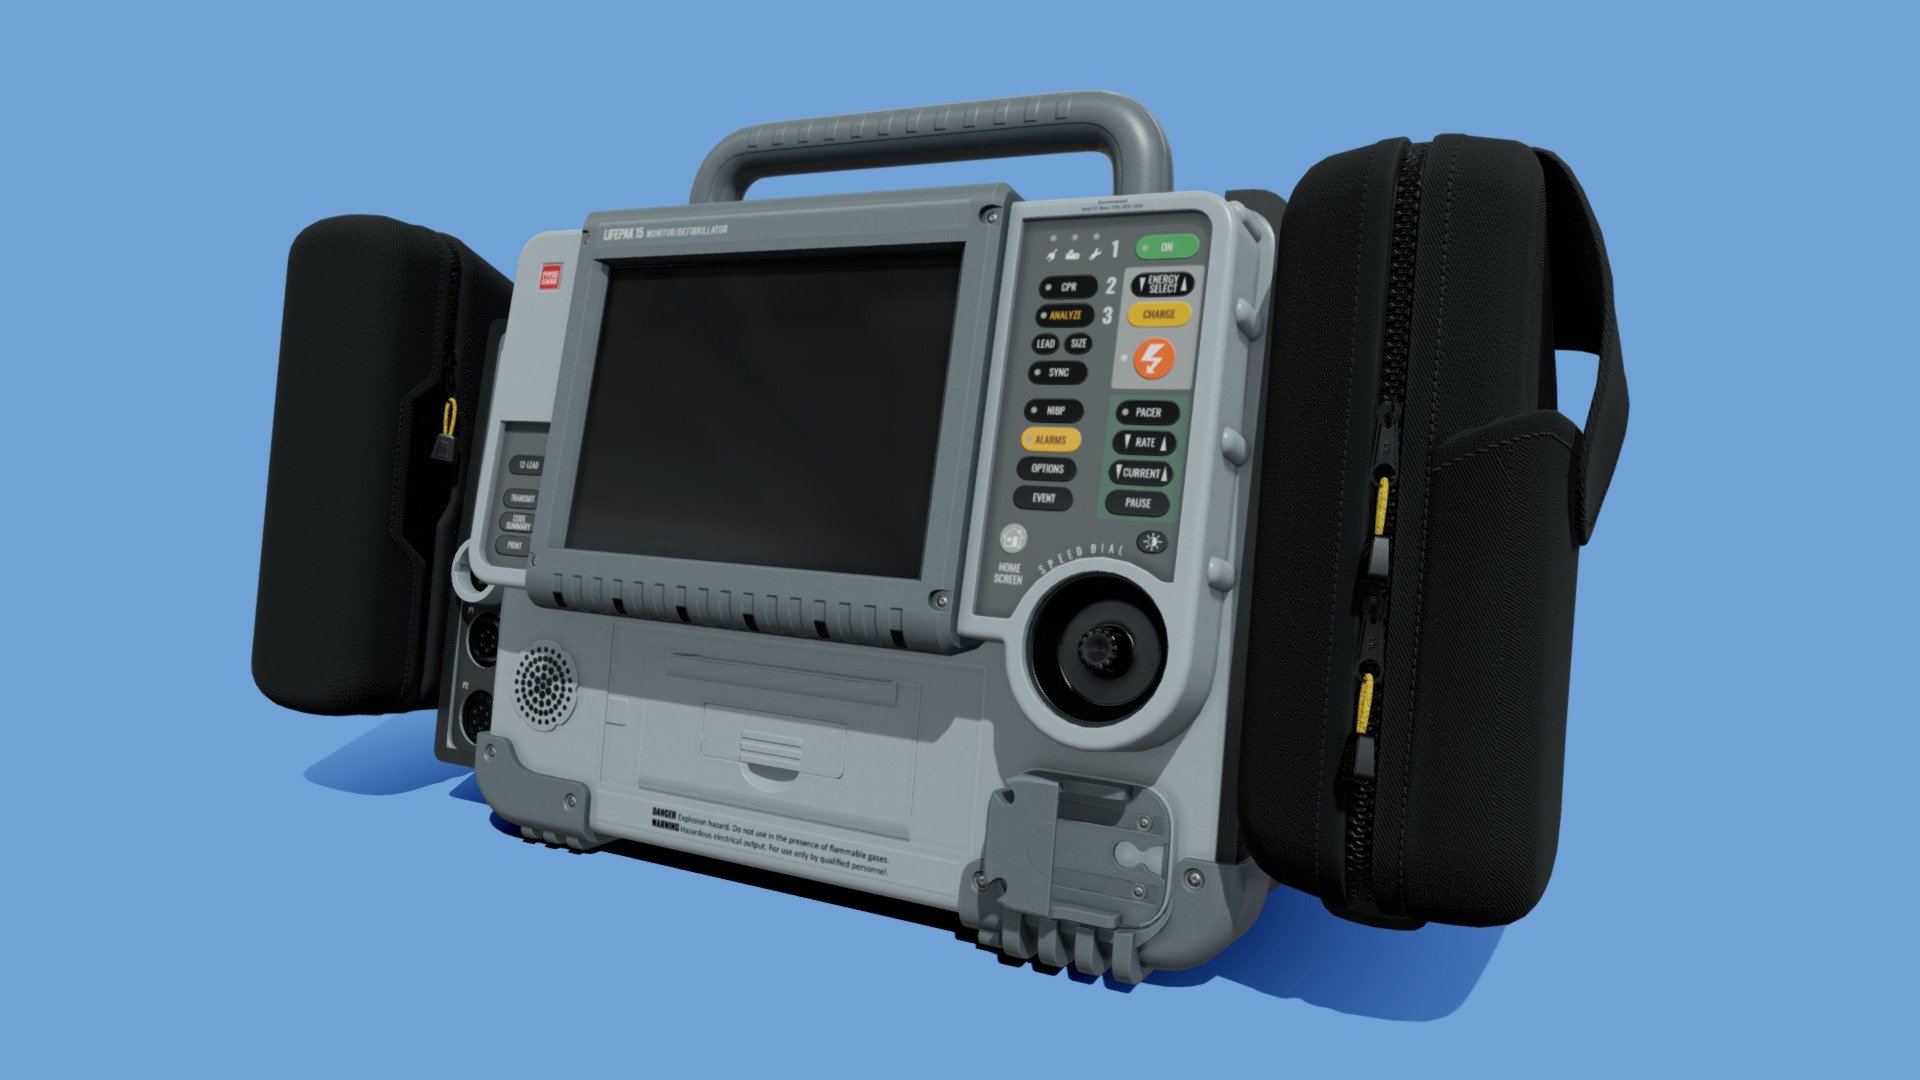 I created a Real-Time 3D Asset for use in Virtual Learning/Education for EMS Professionals using poly-modeling (from scratch) with Blender and PBR texturing in Substance Painter. I used Photoshop for Illustration, Stencil Creation, and essential Texture Map clean-up.

Prop Design based on model variations of the &ldquo;LifePak 15